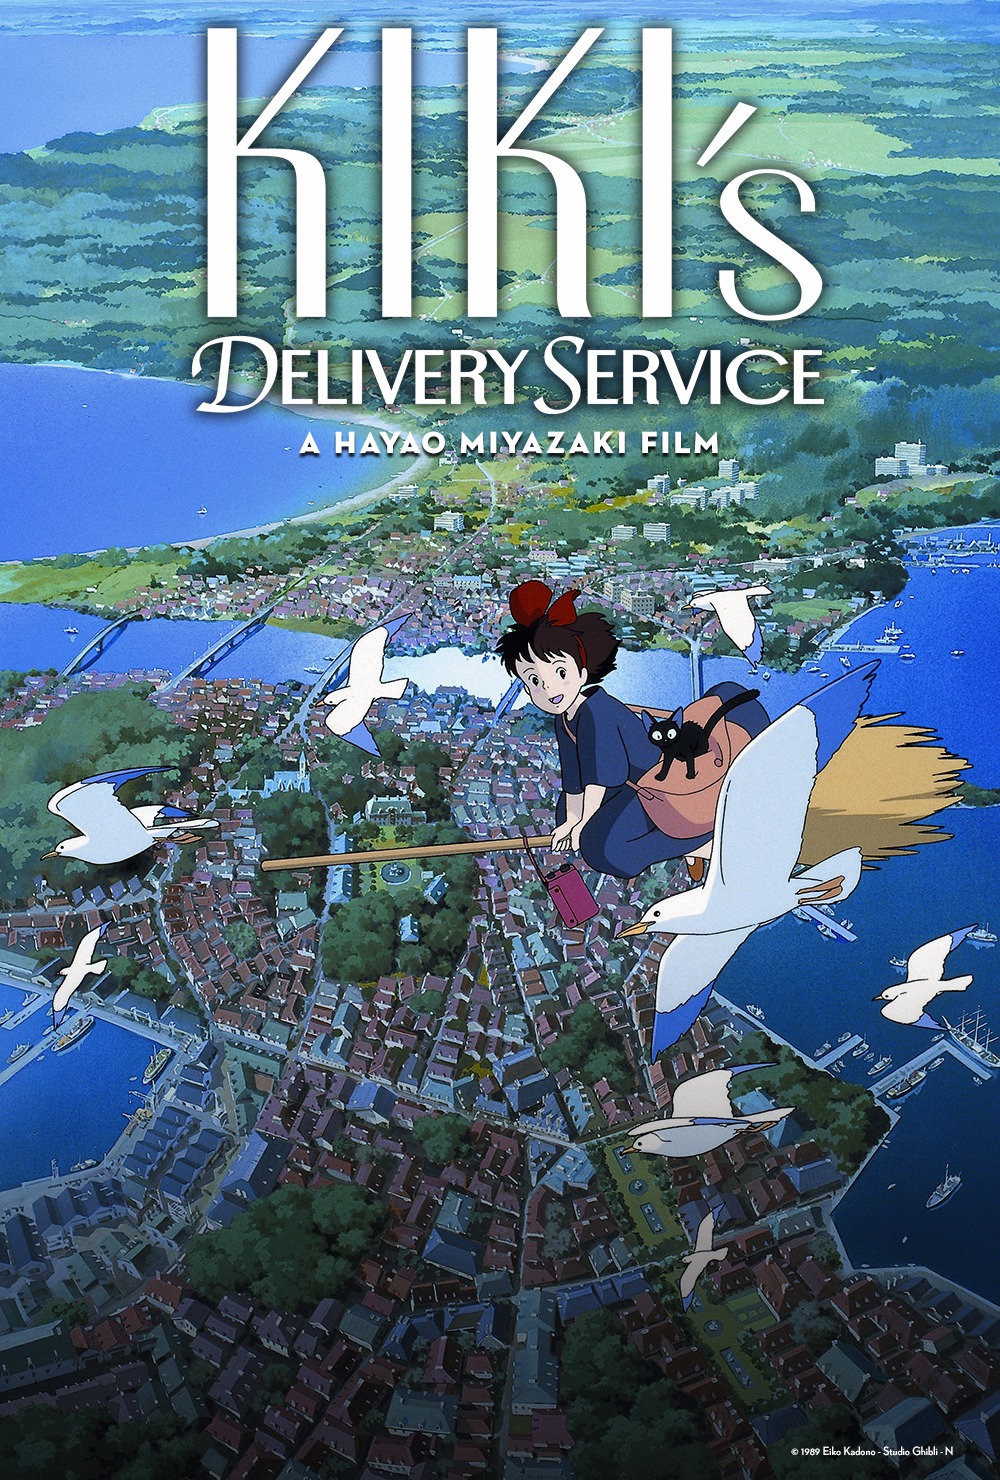 Kiki's Delivery Service's Saddest Moment Never Happened in the Book